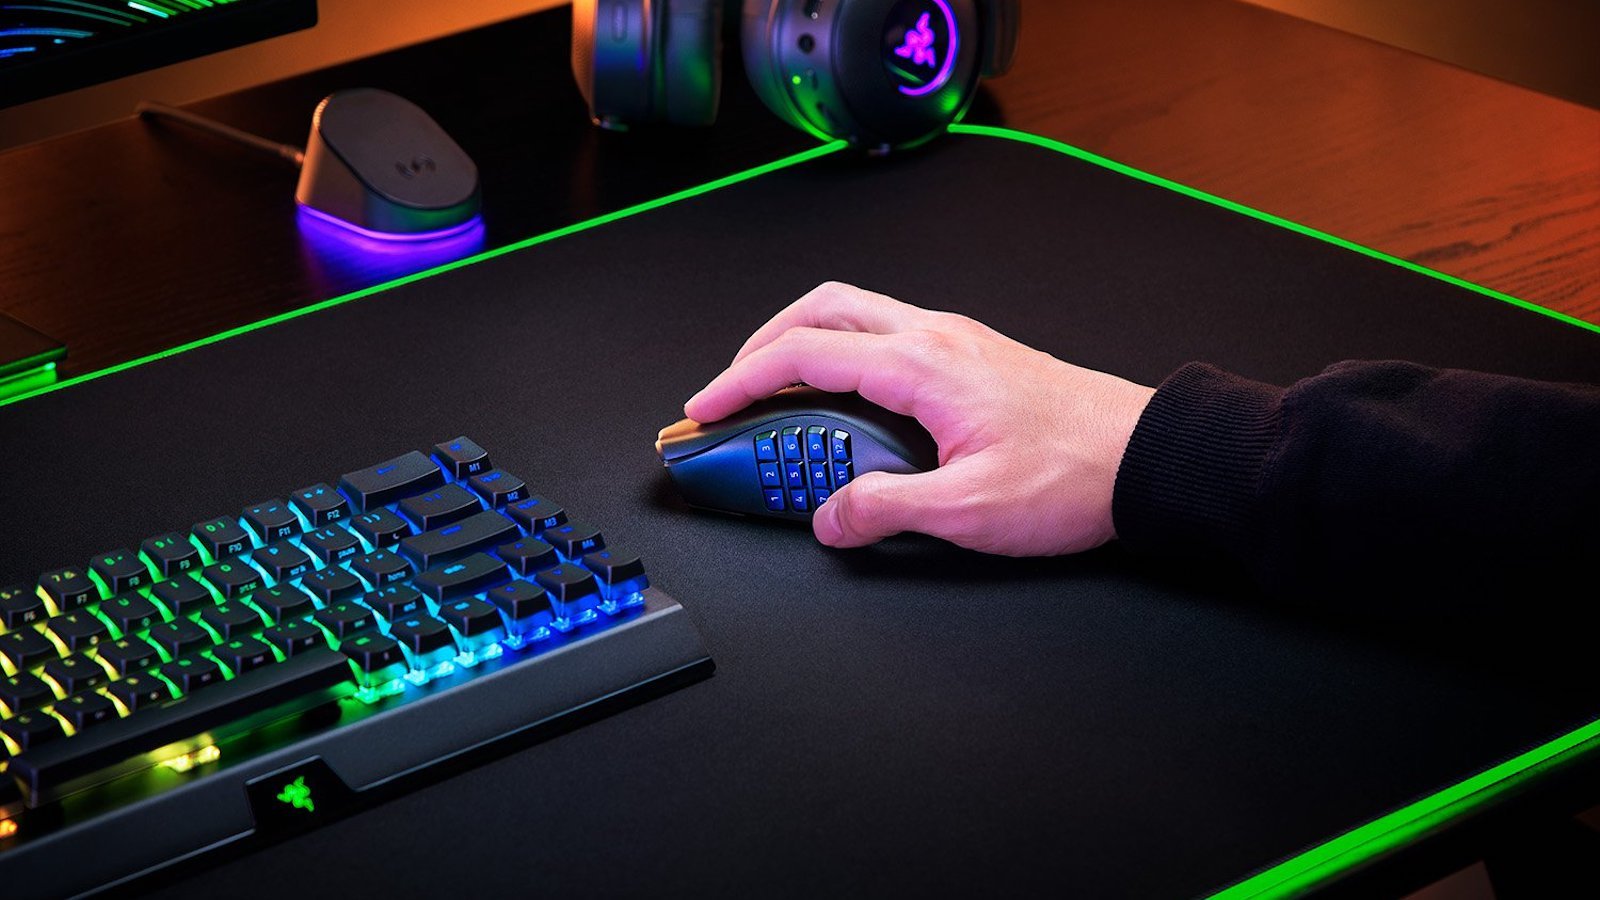 Razer Naga V2 Pro MMO gaming mouse with HyperScroll Pro Wheel is a multigenre master